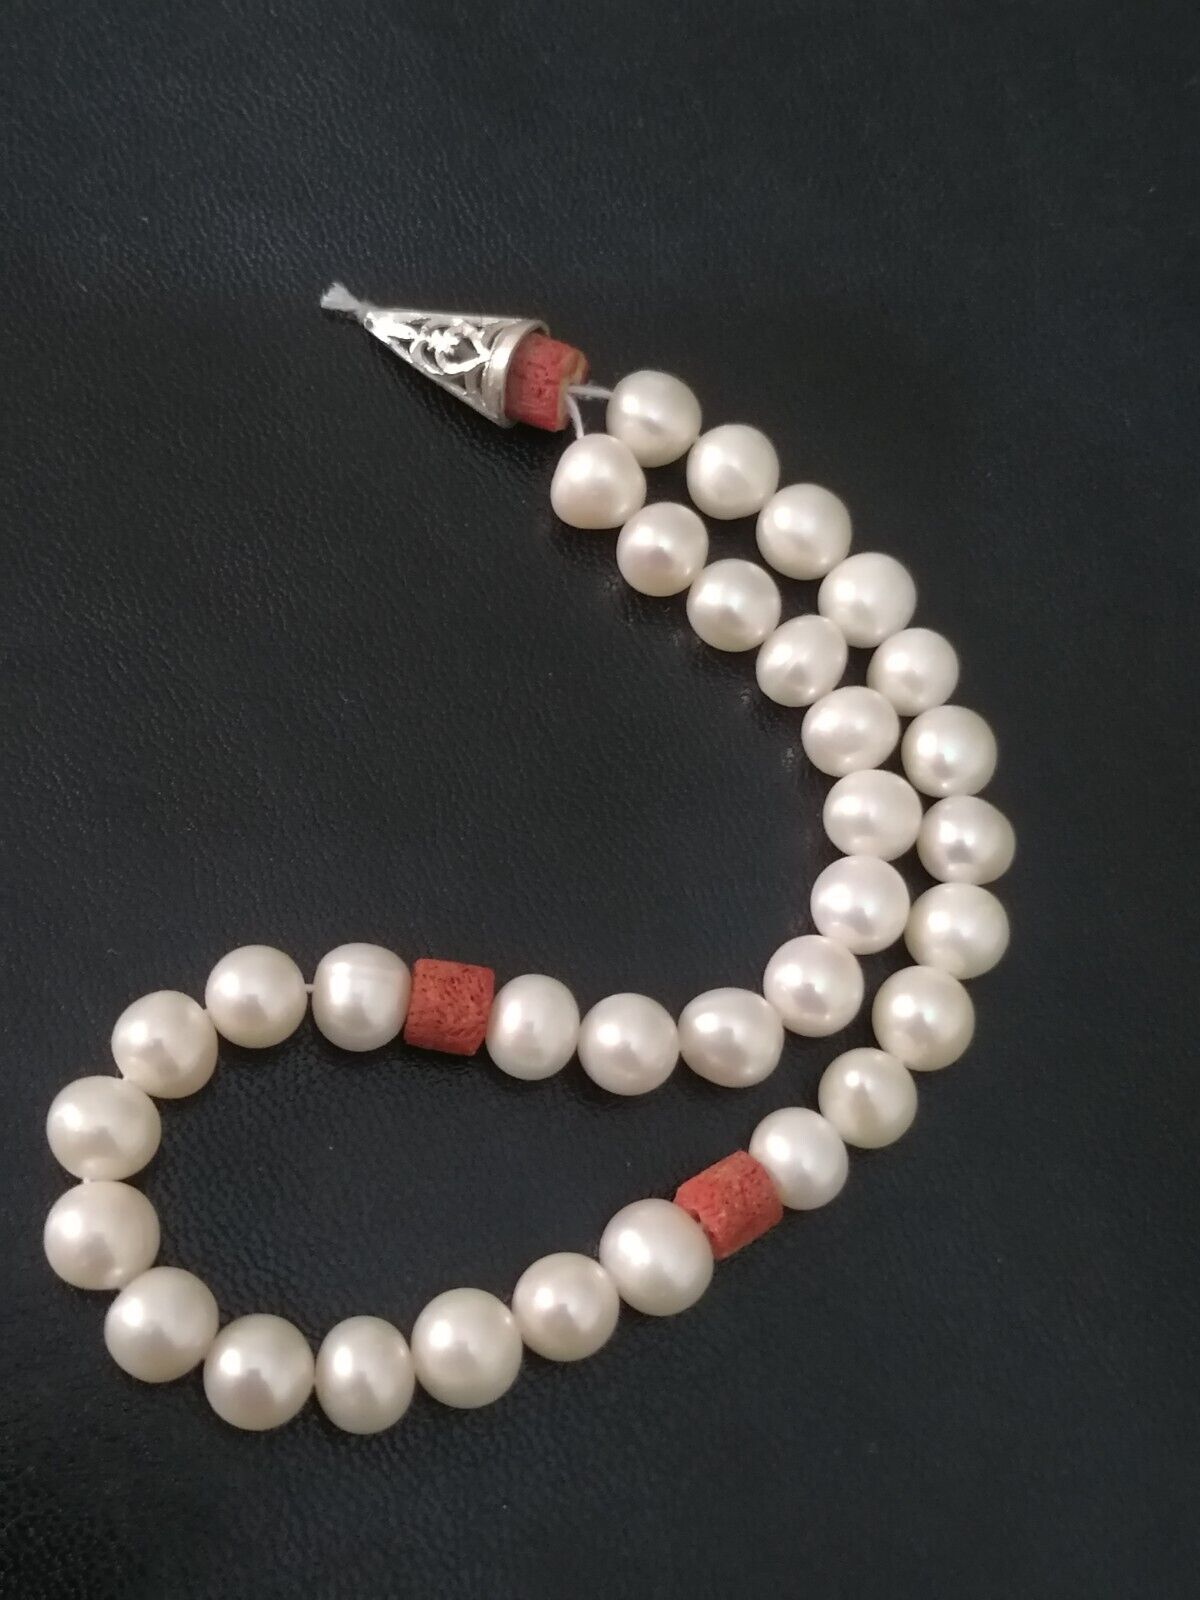 Stunning Handmade 33 Prayer Pearl Beads & Natural Coral Openwork Solid Silver